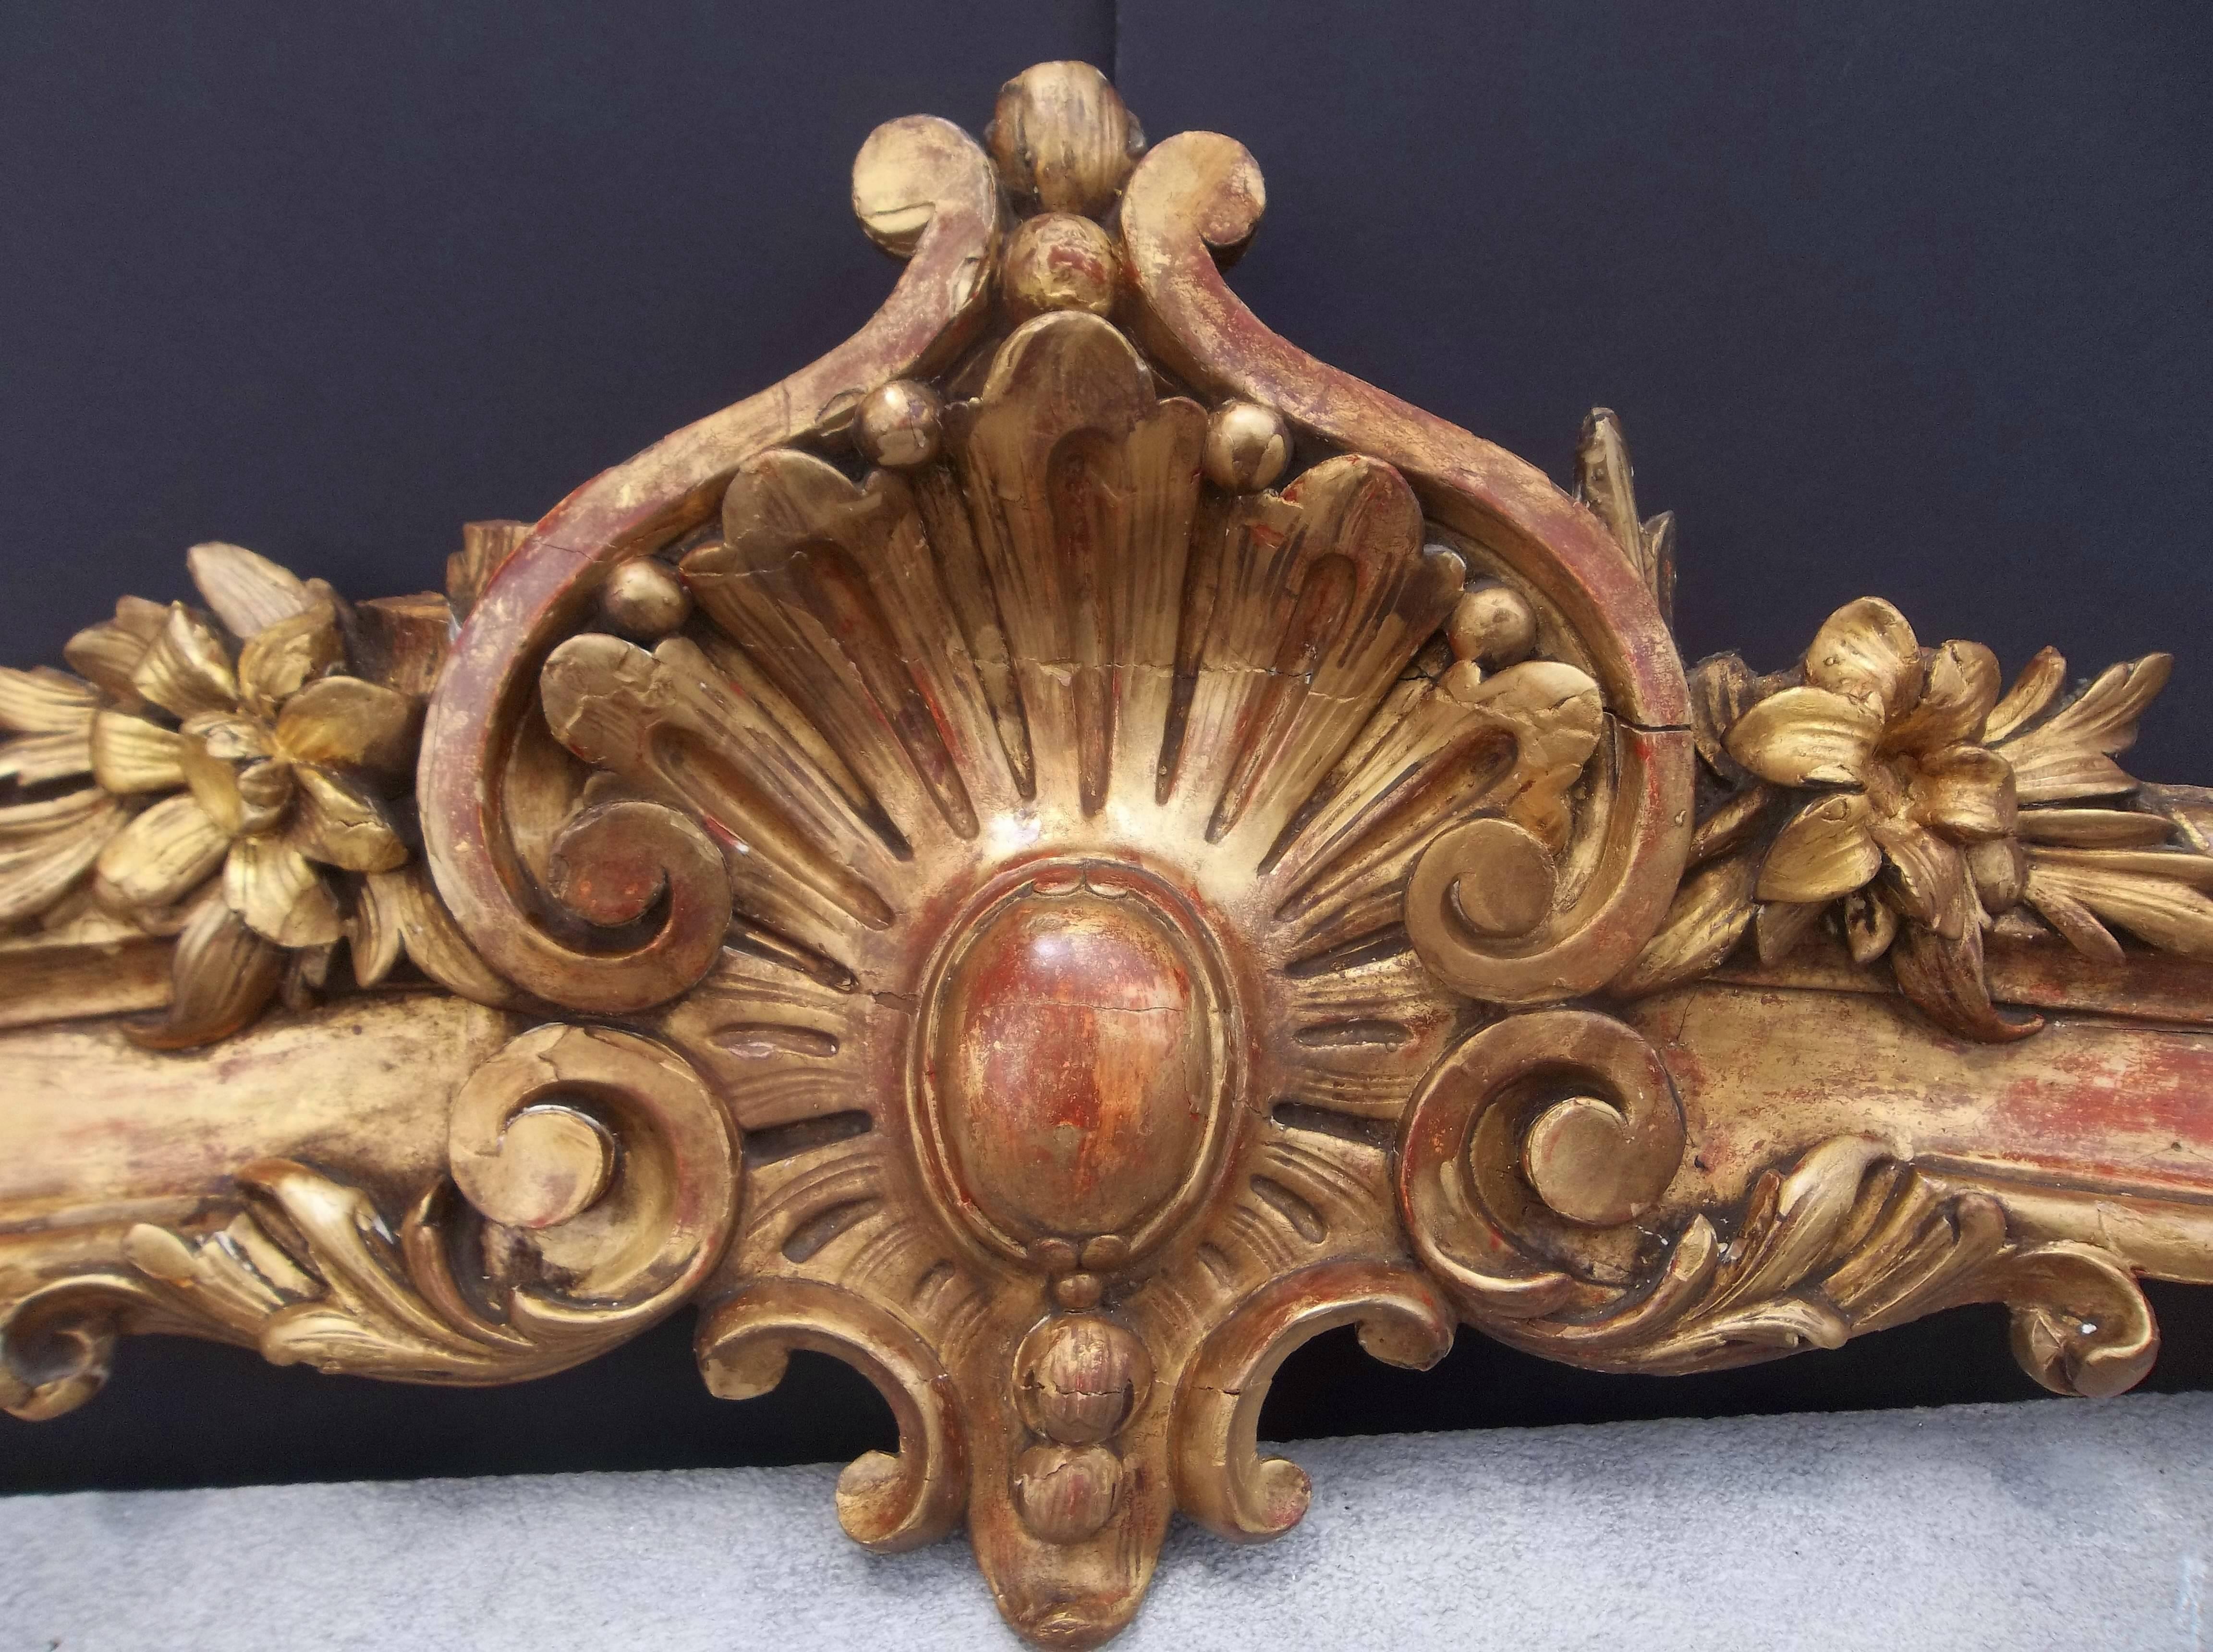 Possibly part of a window valence. 

Overall highly decorative but with numerous chips, losses with some re-gilt, some in-painting and other touchups. Filled crack across the central shell. Red bole and some white underbase gesso showing